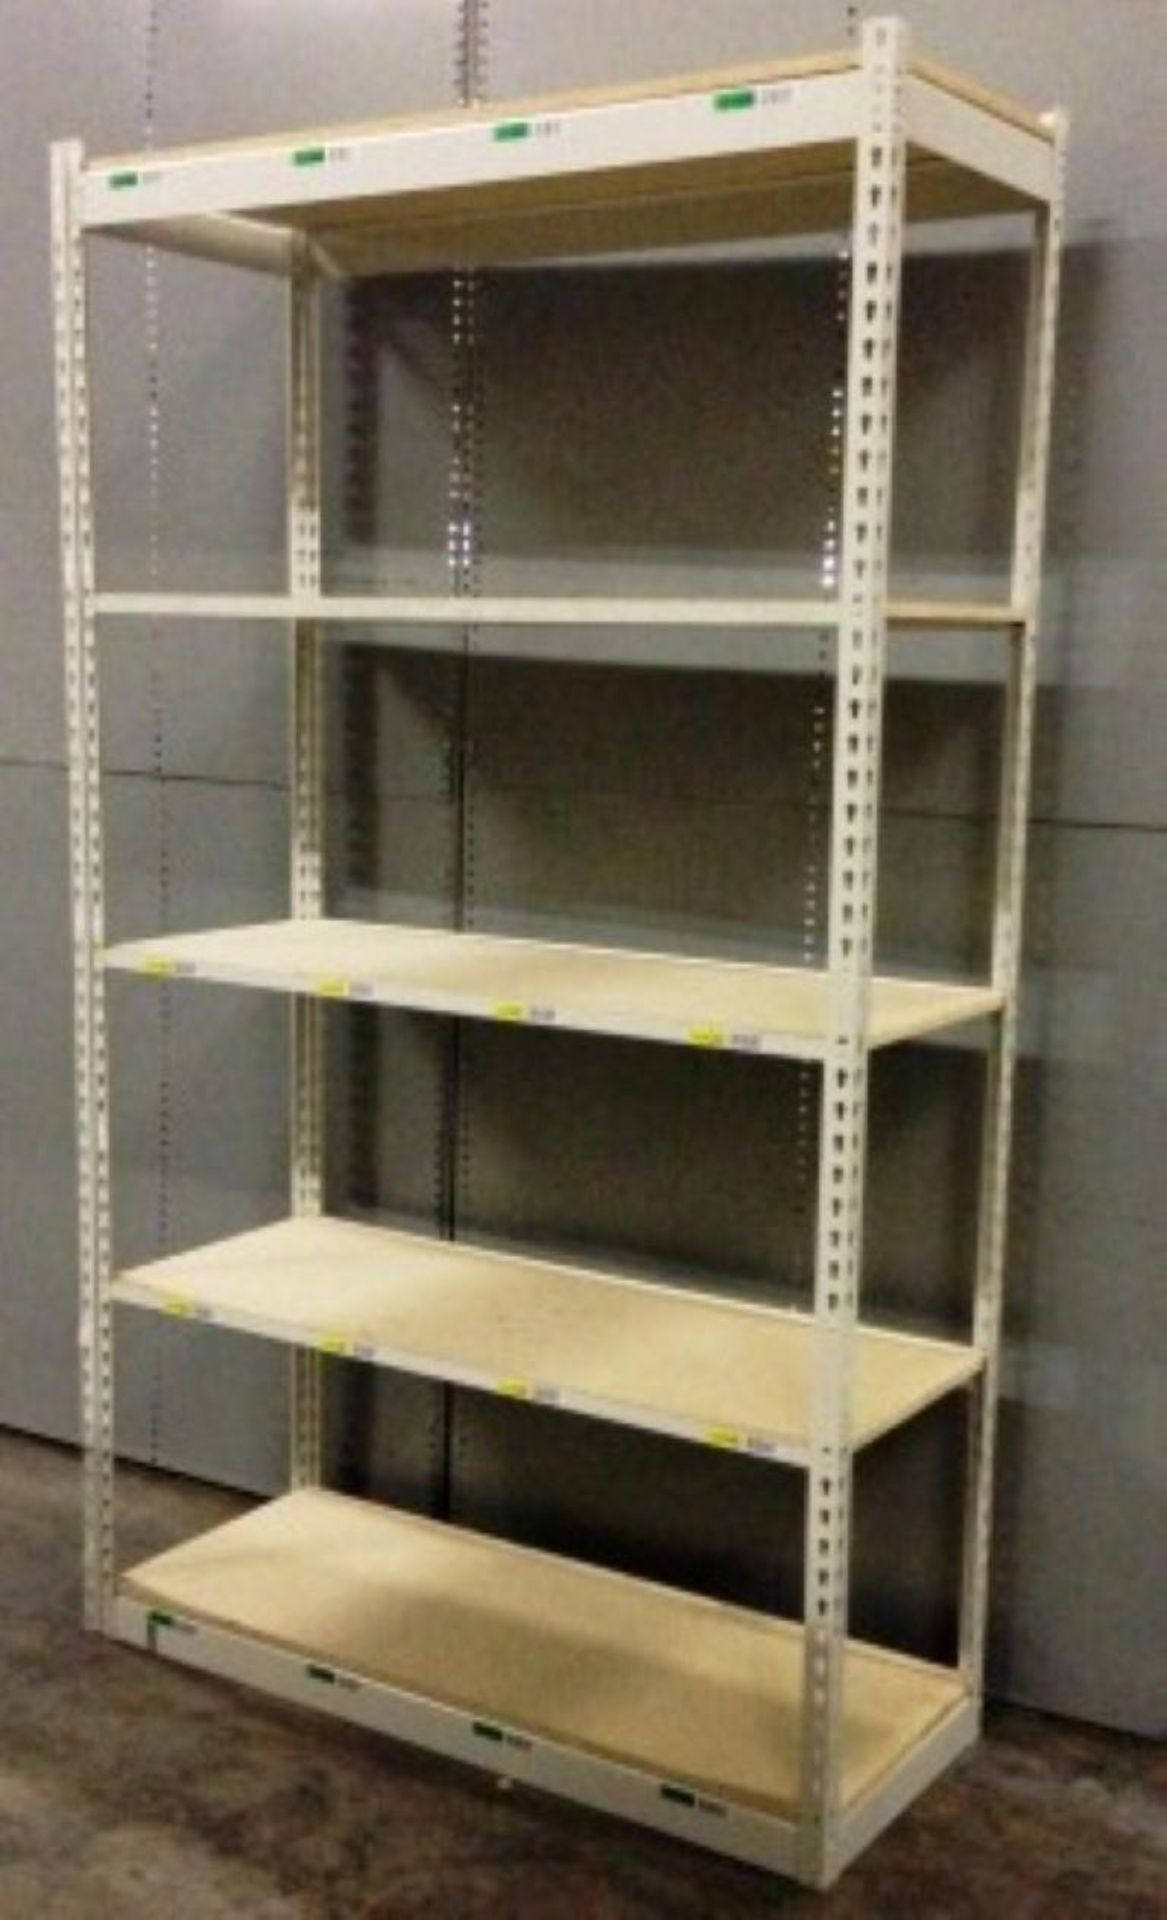 ONE LOT OF 30 SECTIONS OF RIVETIER INDUSTRIAL SHELVING - Image 2 of 2